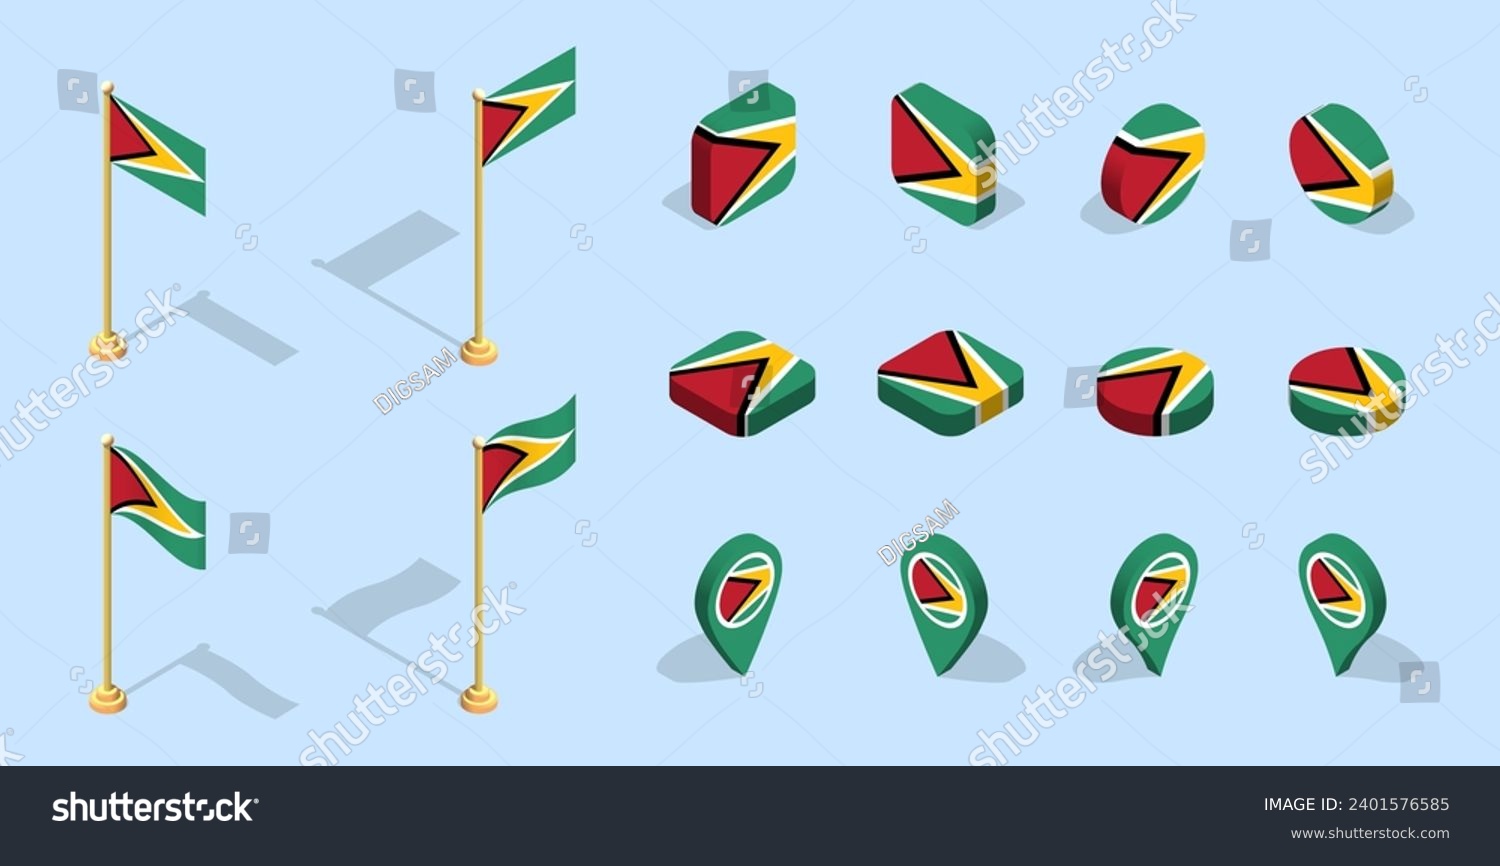 SVG of Guyanese flag (Co-operative Republic of Guyana). 3D isometric flag set icon. Editable vector for banner, poster, presentation, infographic, website, apps, maps, and other uses. svg